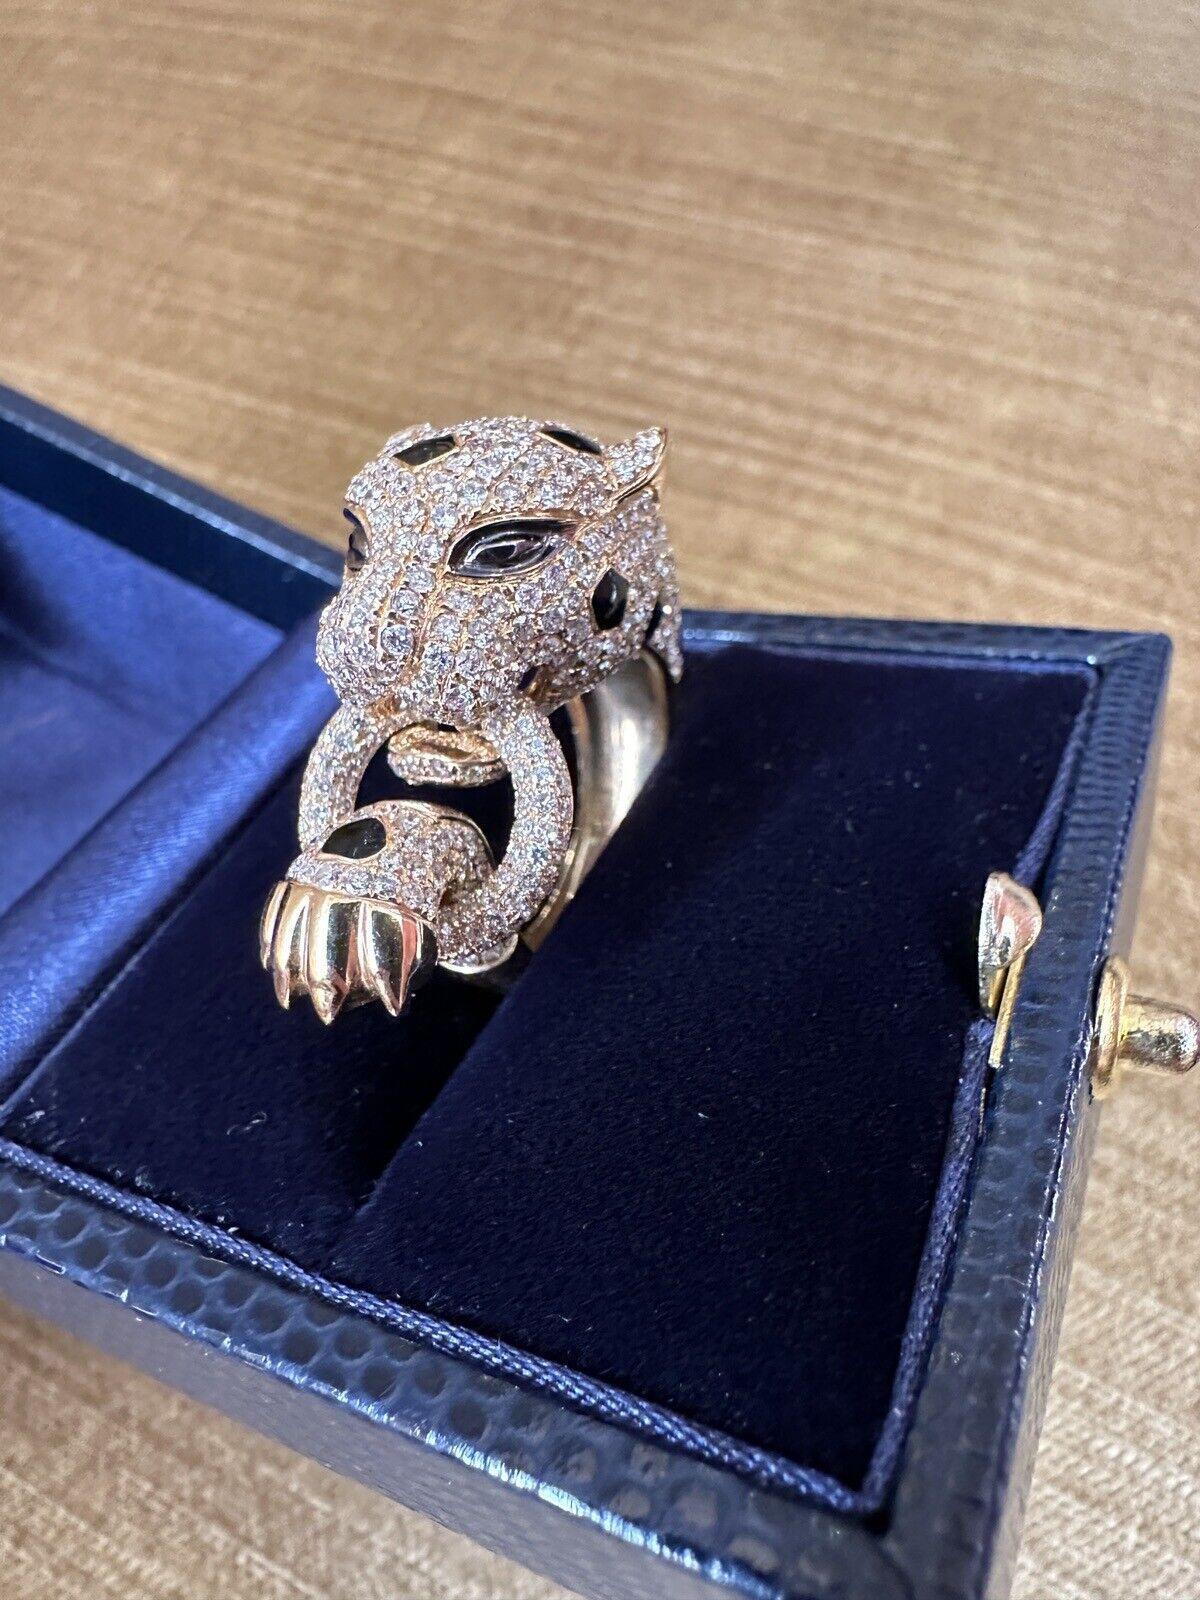 Diamond Pavé Panther Ring 3.51 Carat Total Weight in 18k Yellow Gold In Excellent Condition For Sale In La Jolla, CA